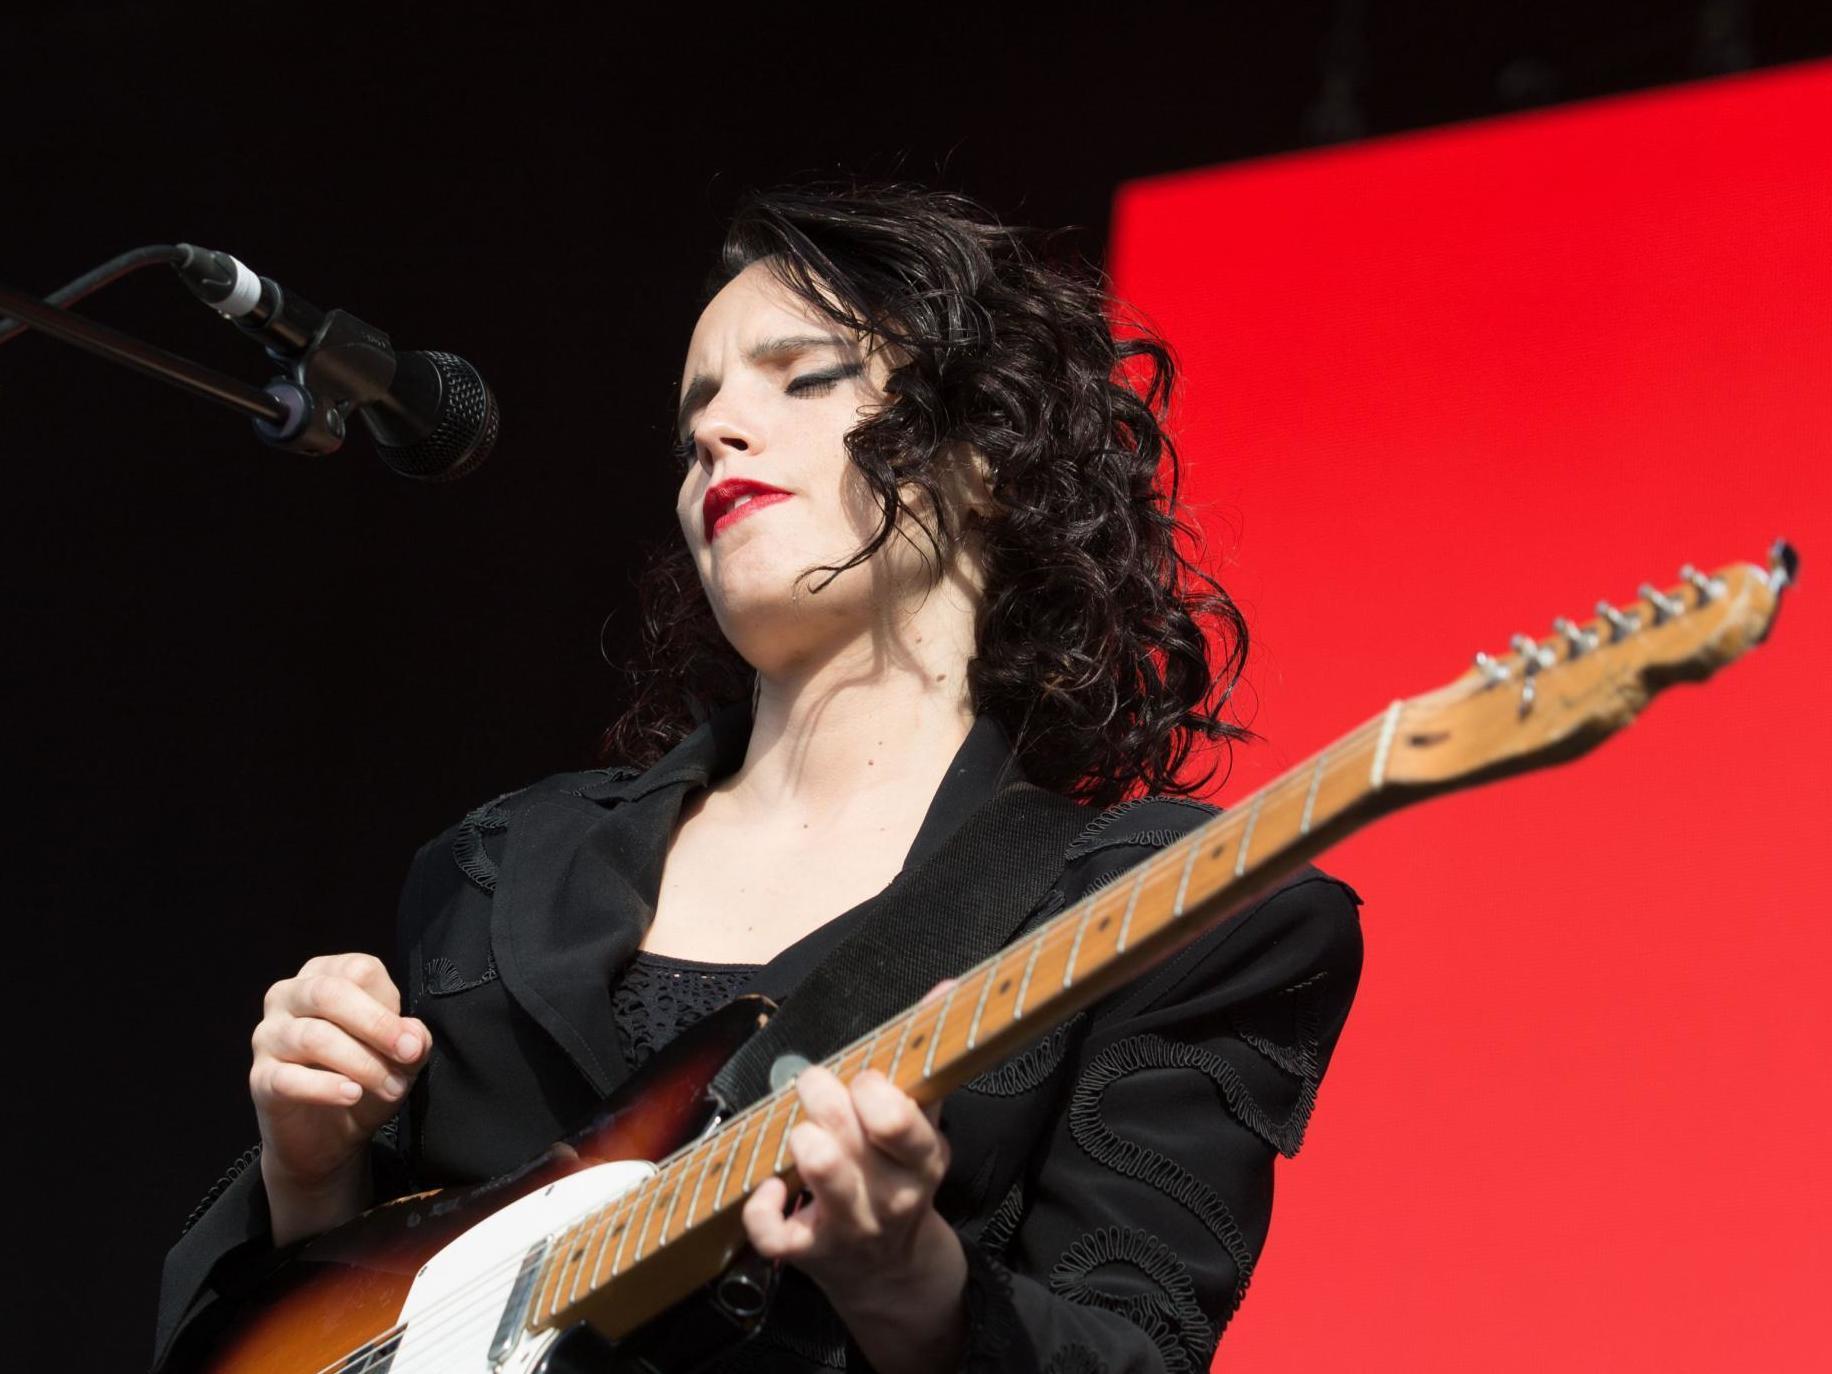 Anna Calvi says Jeff Buckley’s ‘Grace’ altered the course of her life (Rex)